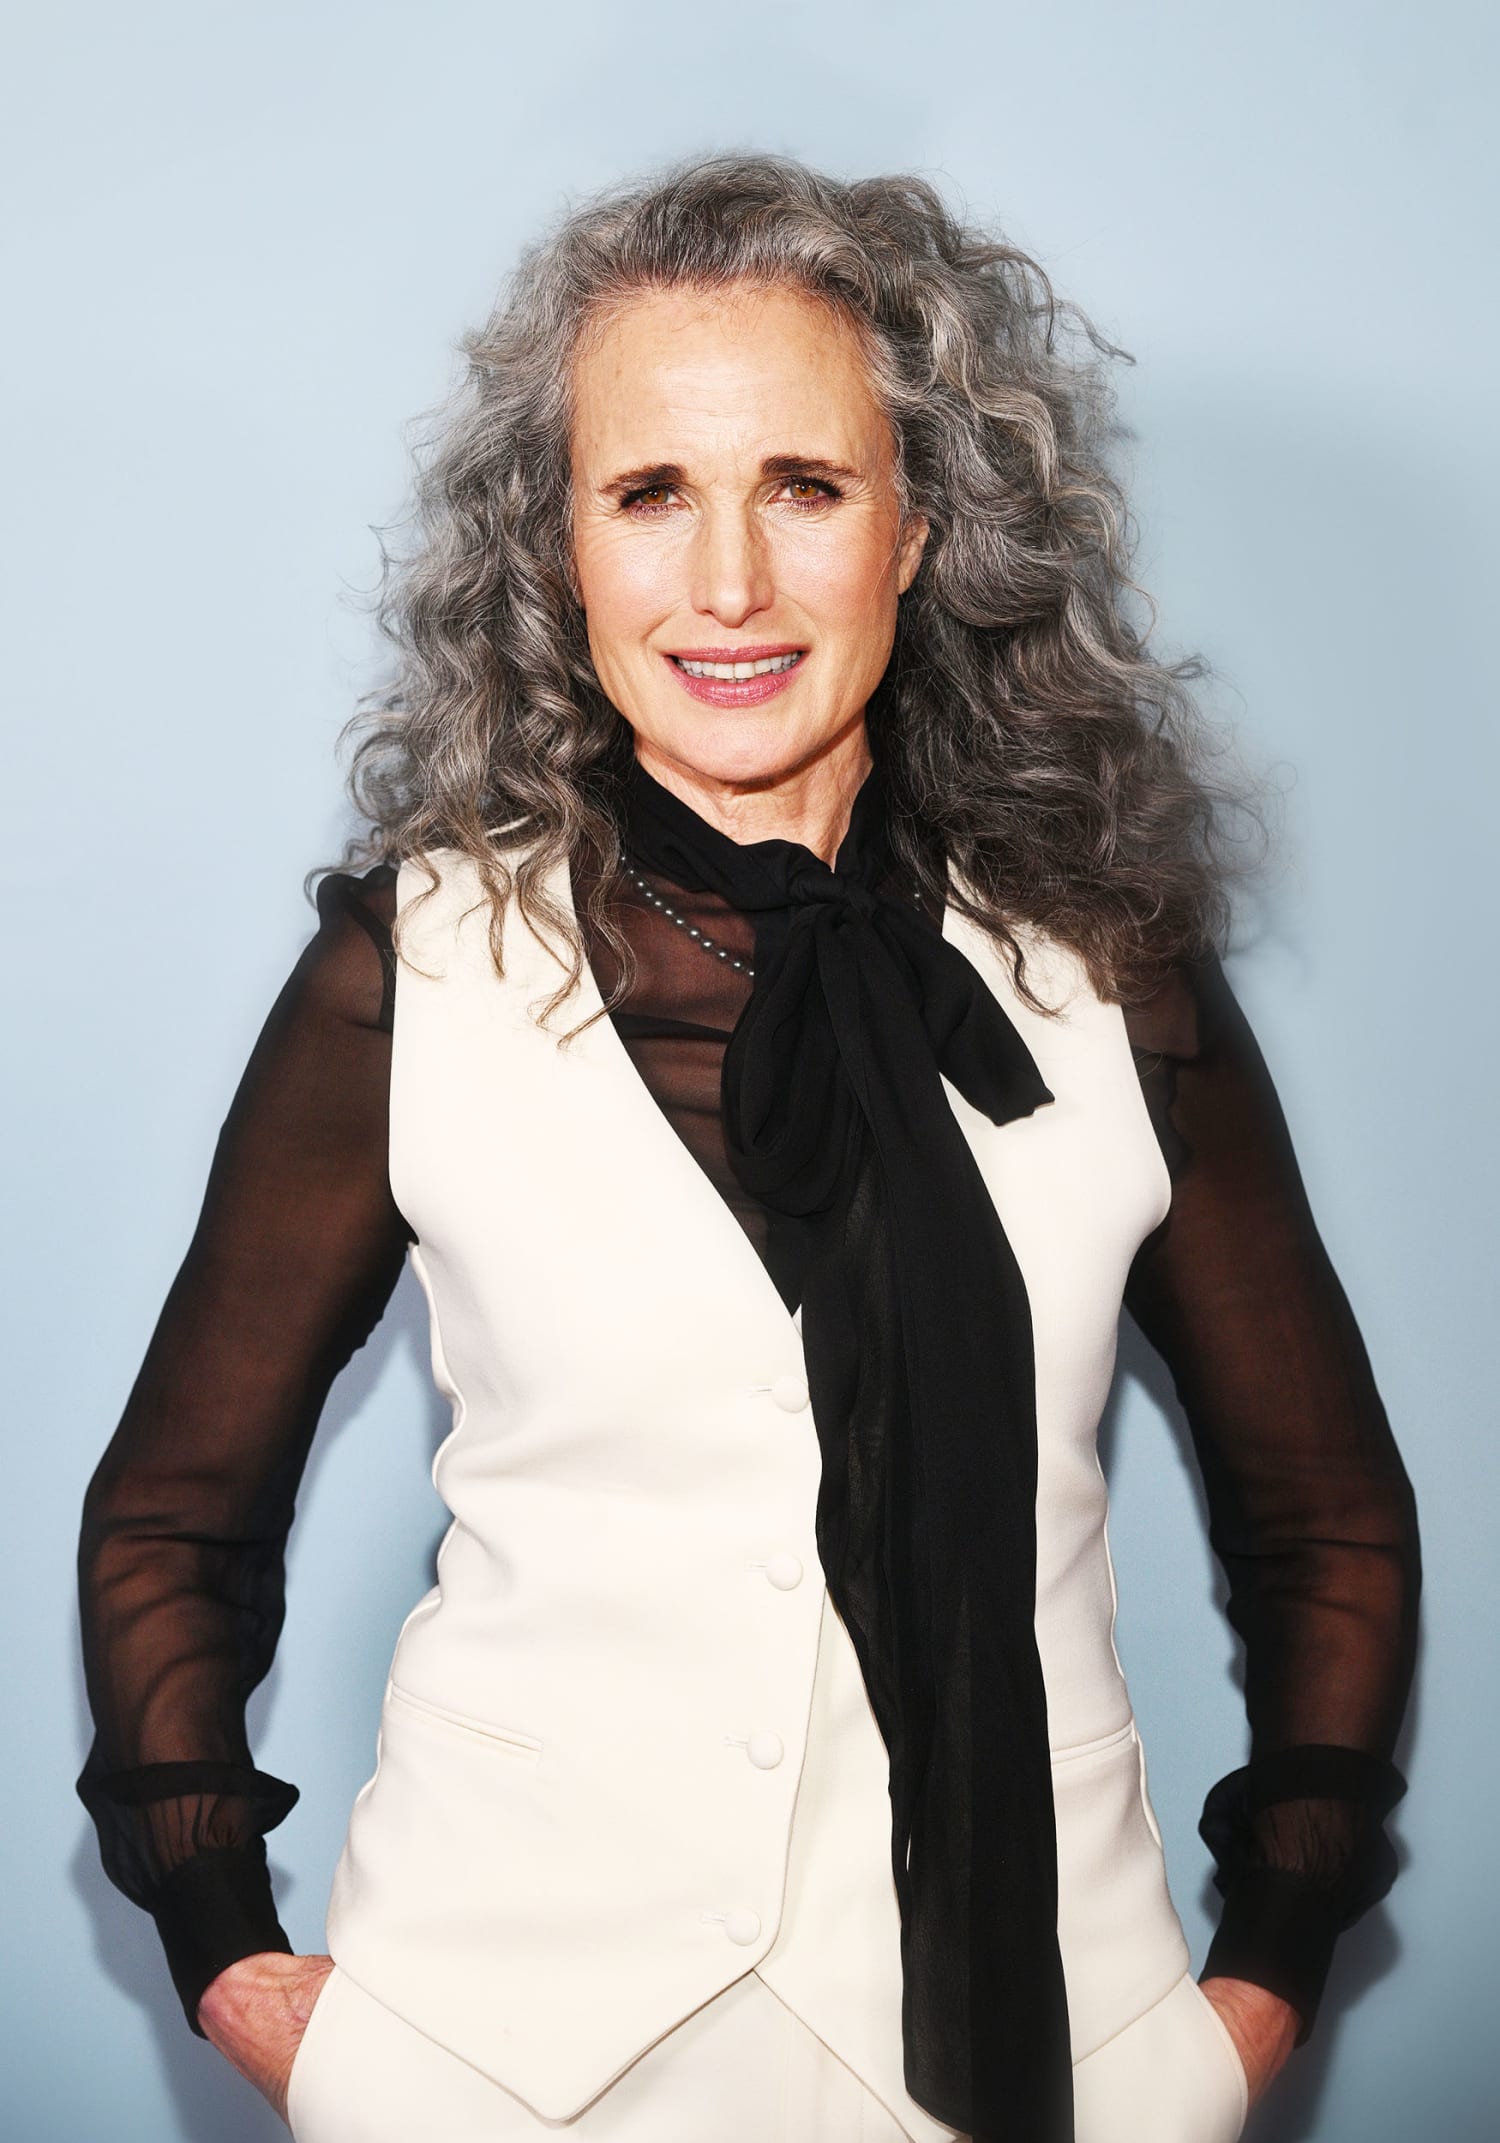 Andie MacDowell on Filming in Her Underwear for Hallmark's The Way Home